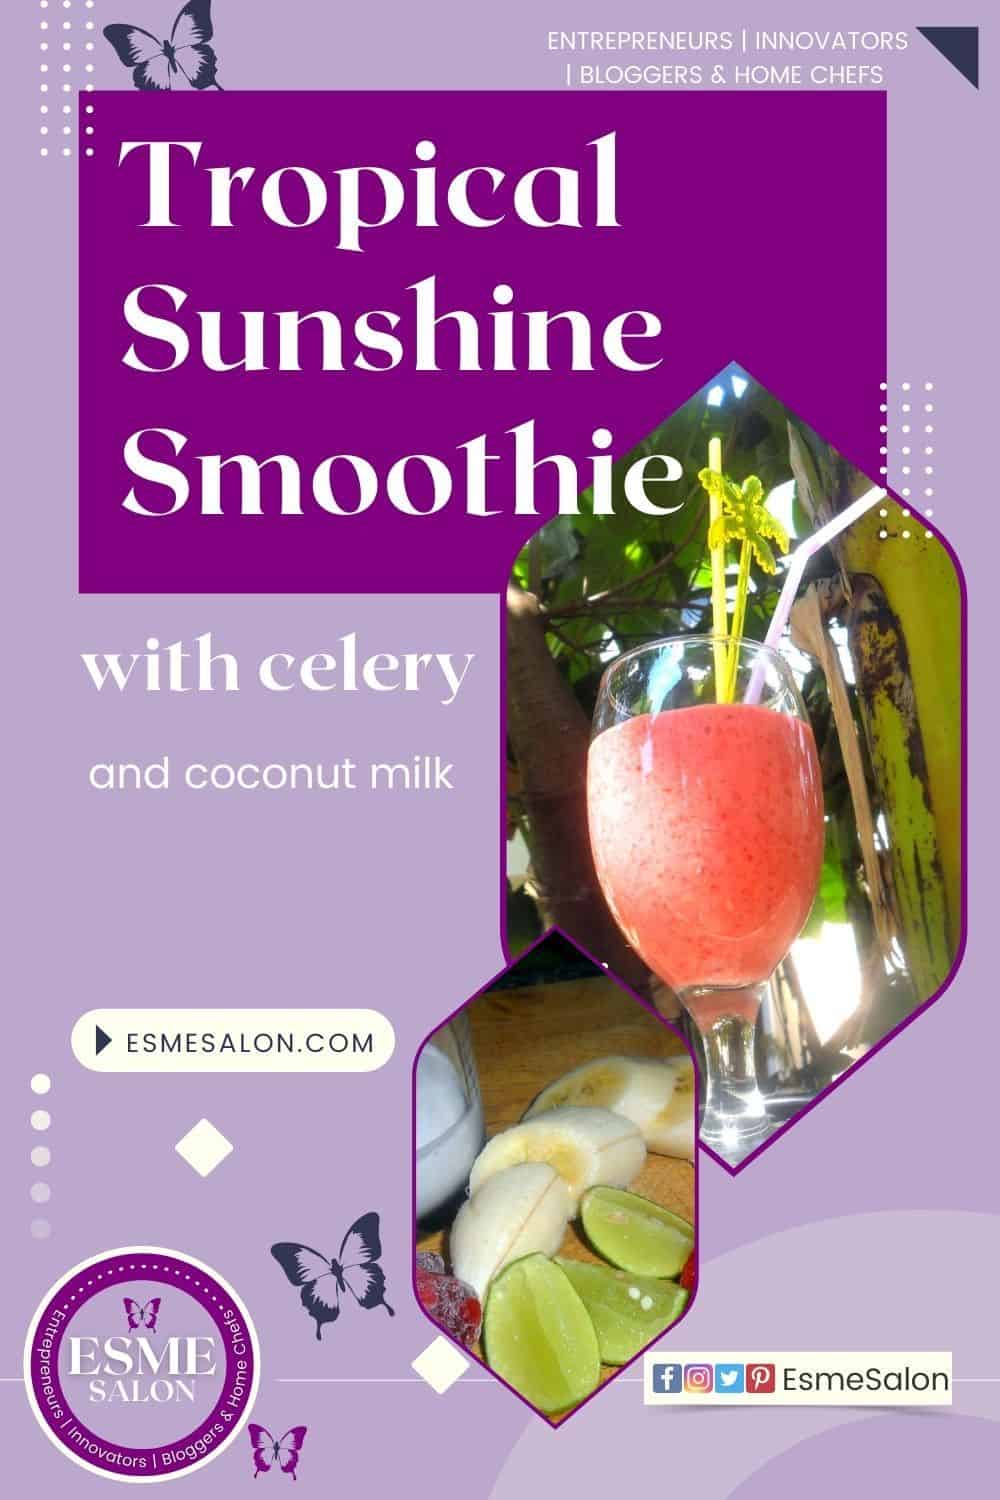 Tropical Sunshine Smoothie with celery sticks and coconut milk